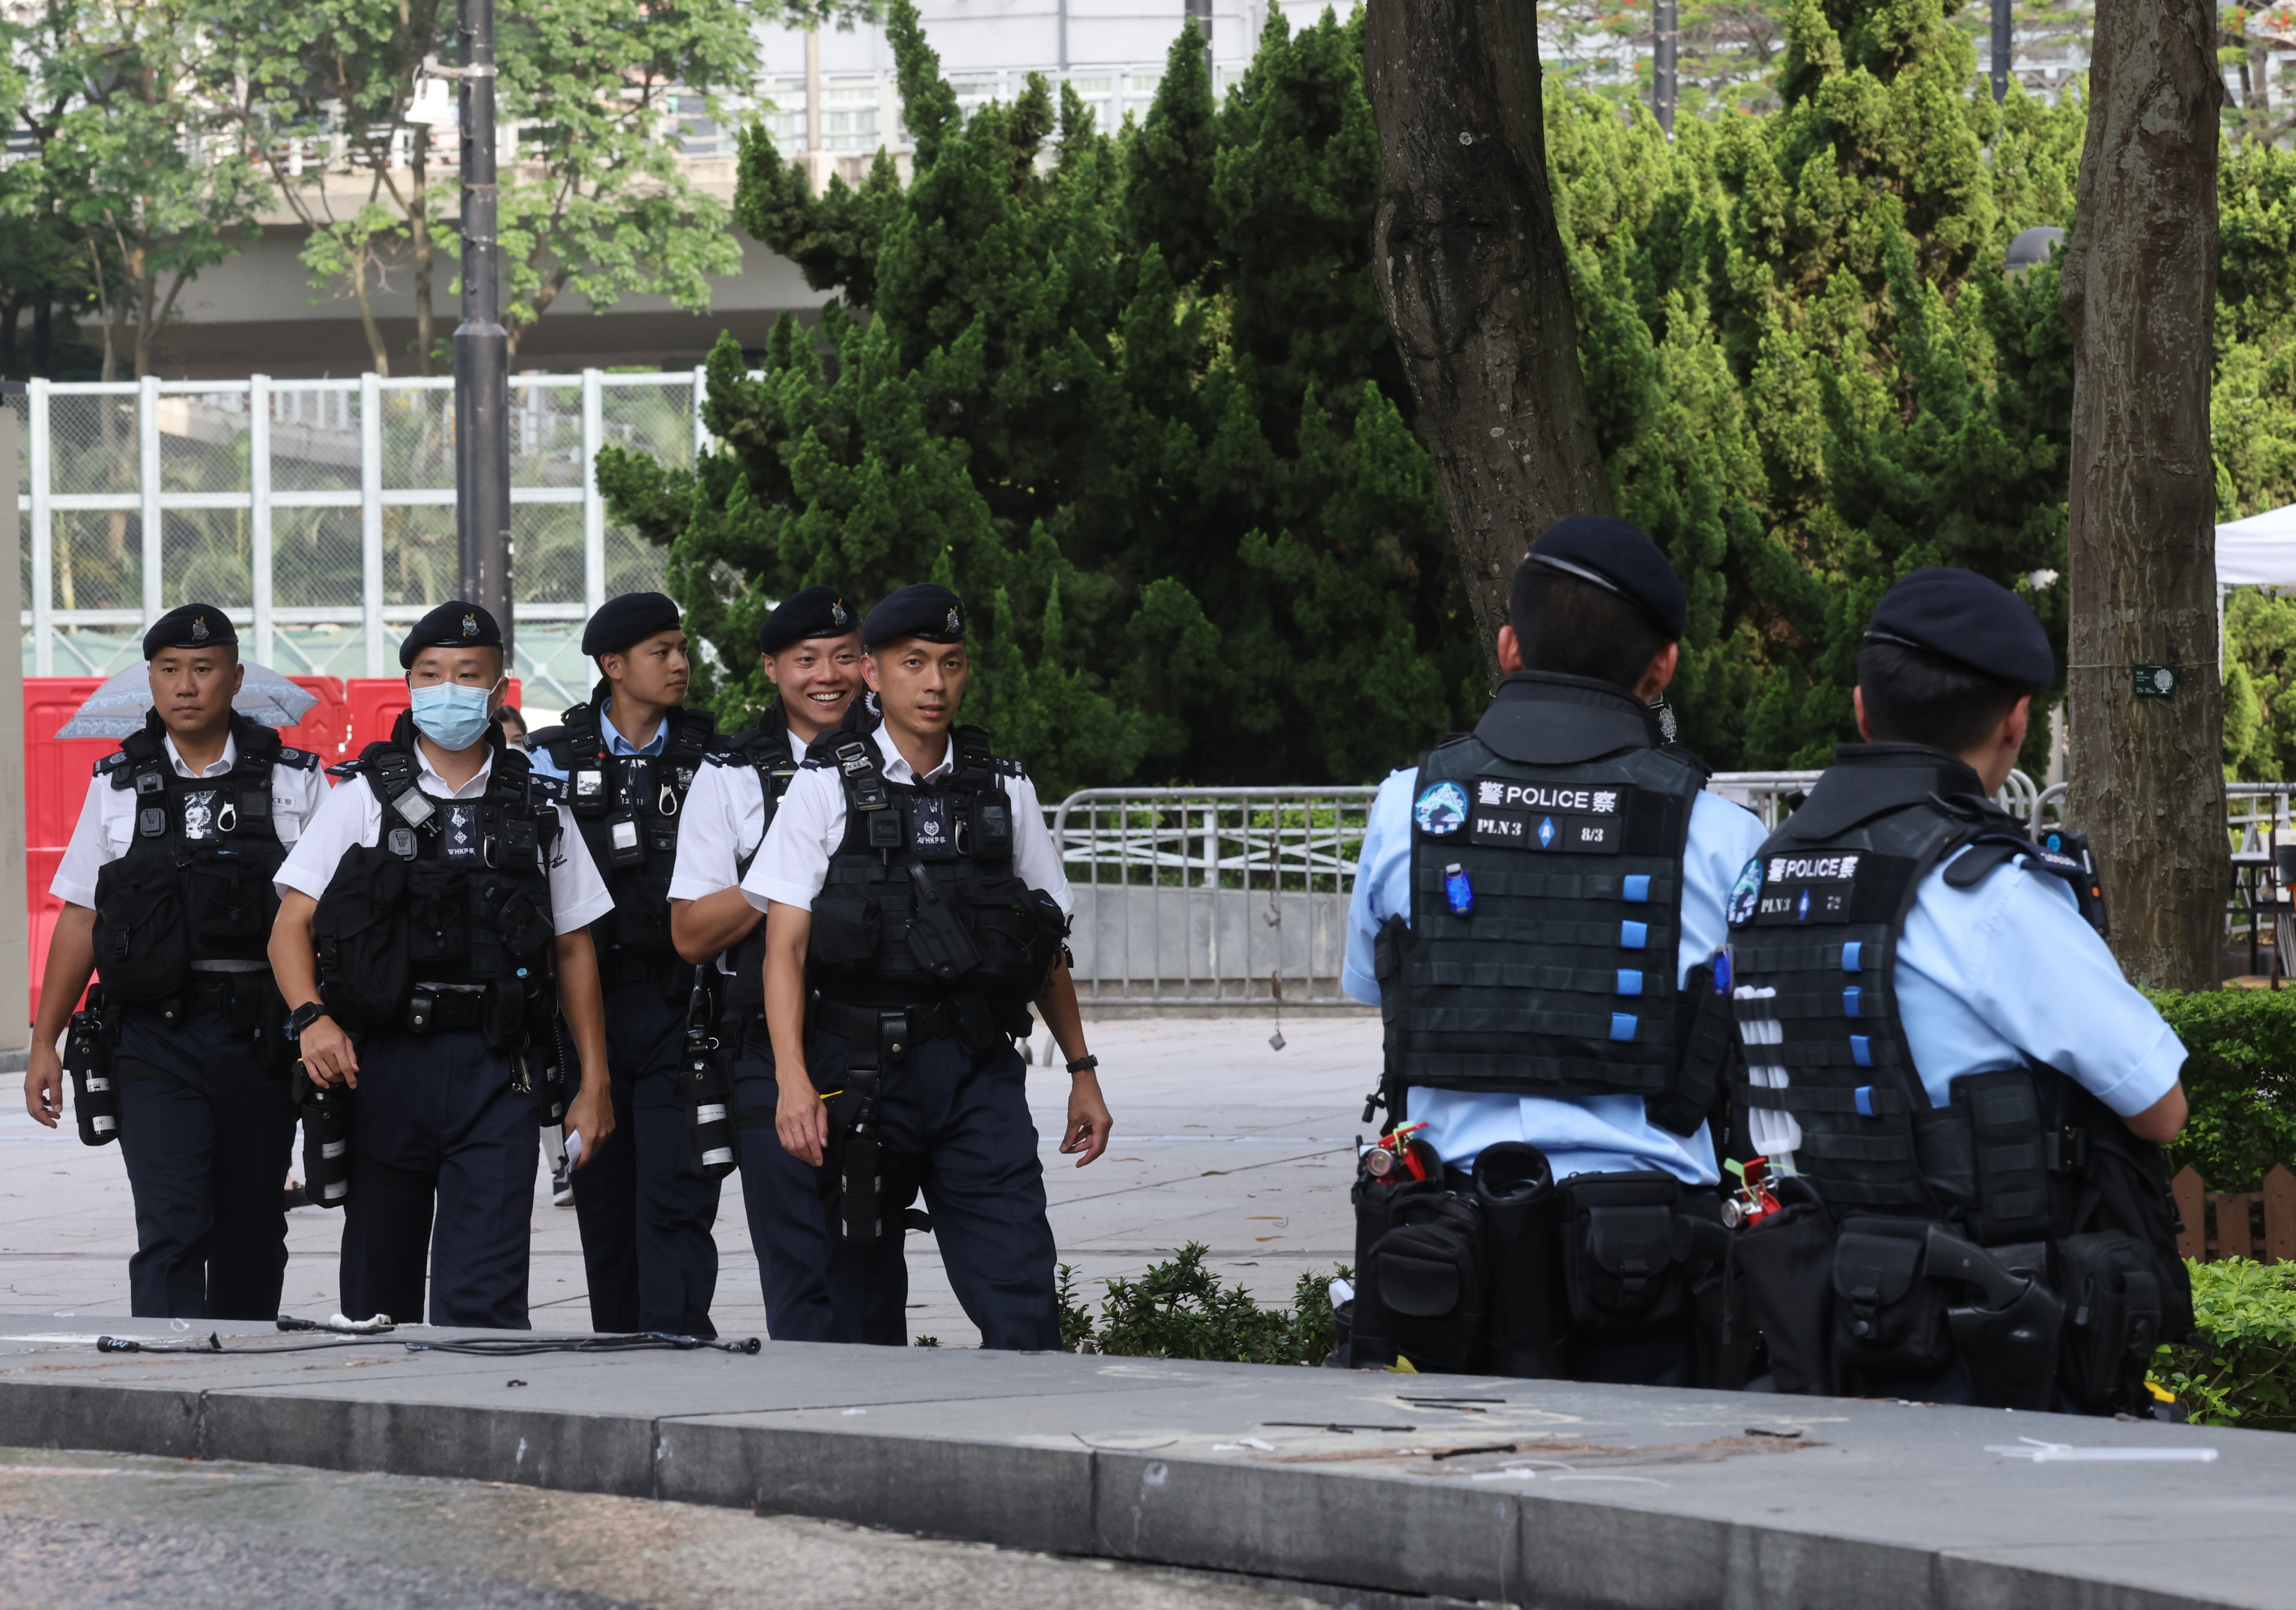 Police at Victoria Park in Causeway Bay ahead of the June 4th incident anniversary. Photo: SCMP / Jonathan Wong